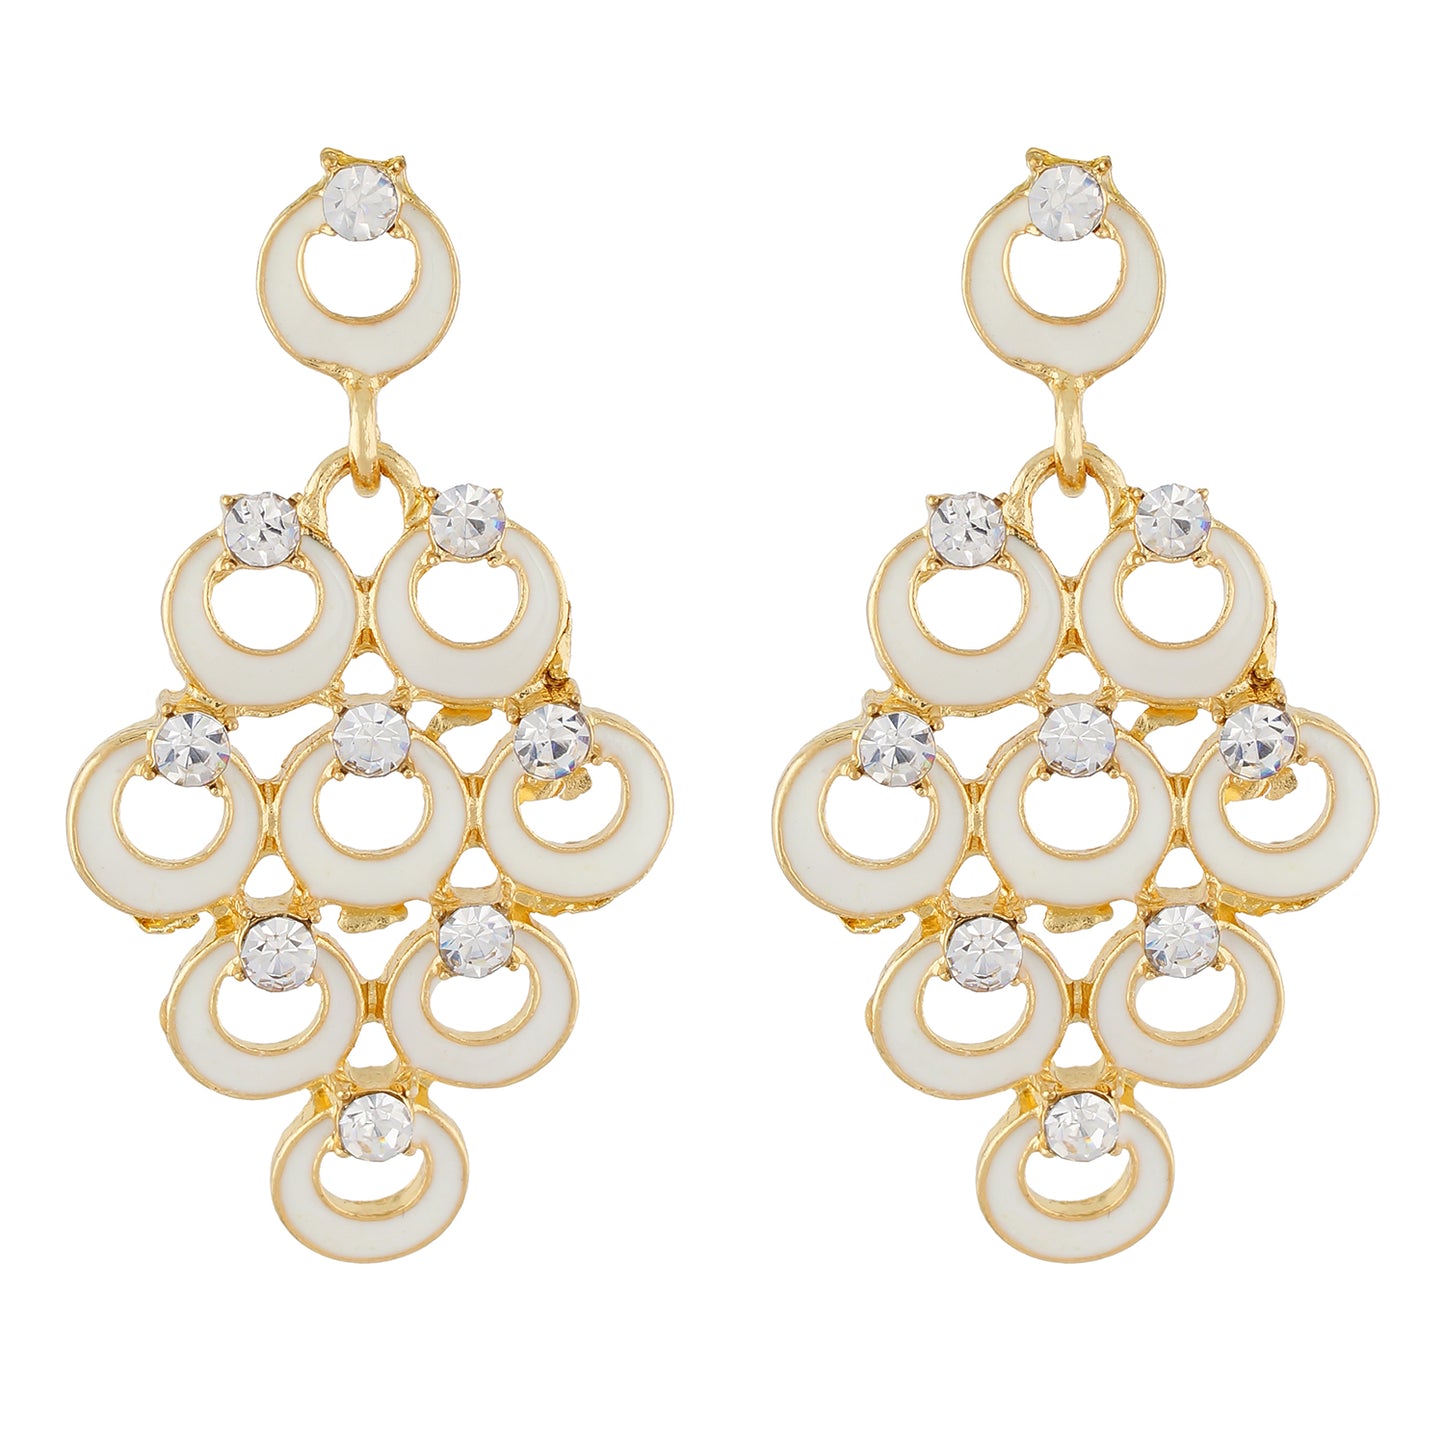 Impressive White and Gold Colour Bunch of Circles Design Earring for Girls and Women